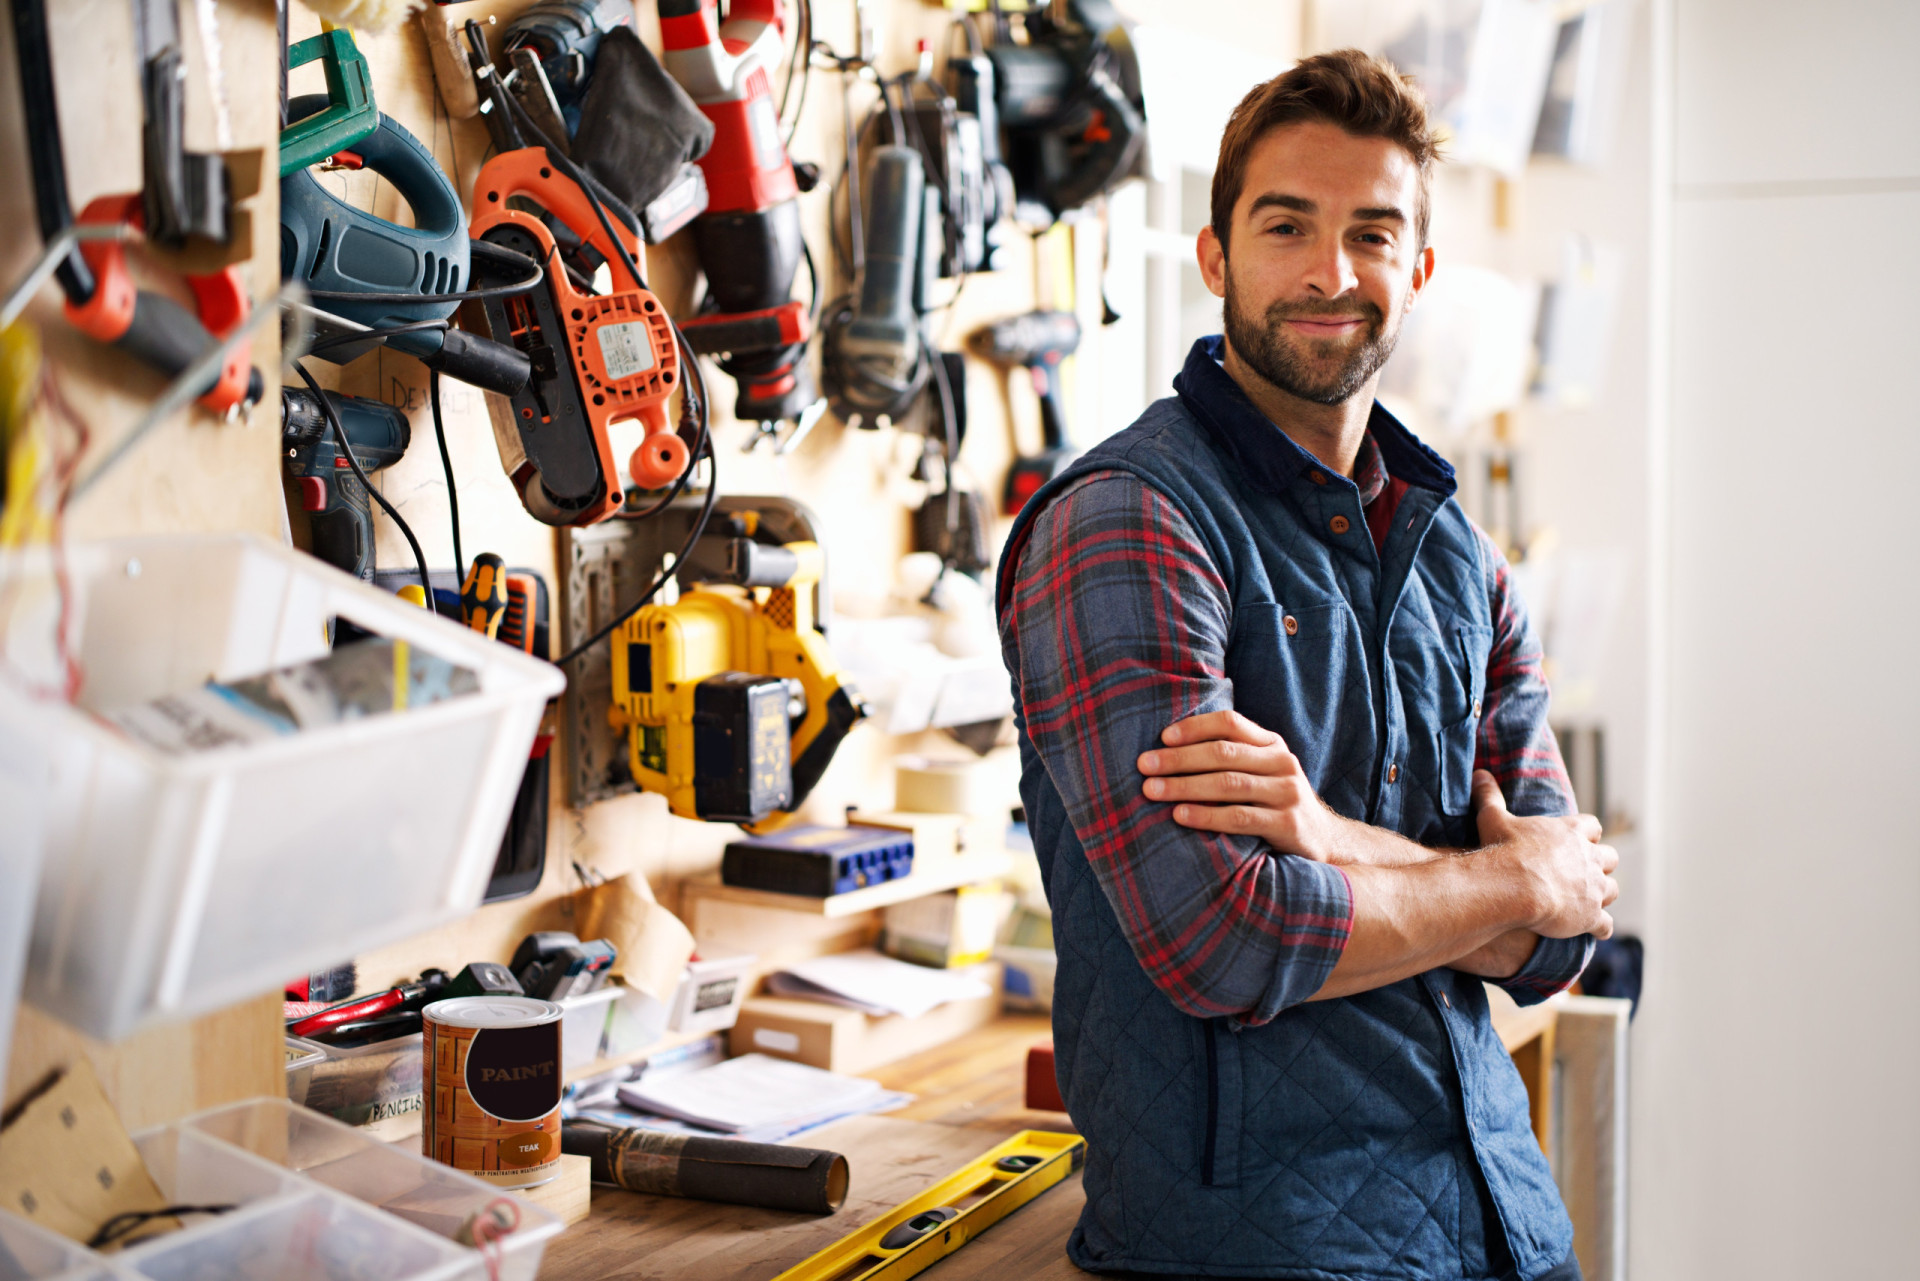 <p>Starting a handyman business can be highly profitable for anyone with repair skills. Your duties can include formwork, carpentry, and electrical work.</p><p>You may also like:<a href="https://www.starsinsider.com/n/279719?utm_source=msn.com&utm_medium=display&utm_campaign=referral_description&utm_content=670061en-en"> Actors who didn't make it until later in their lives</a></p>